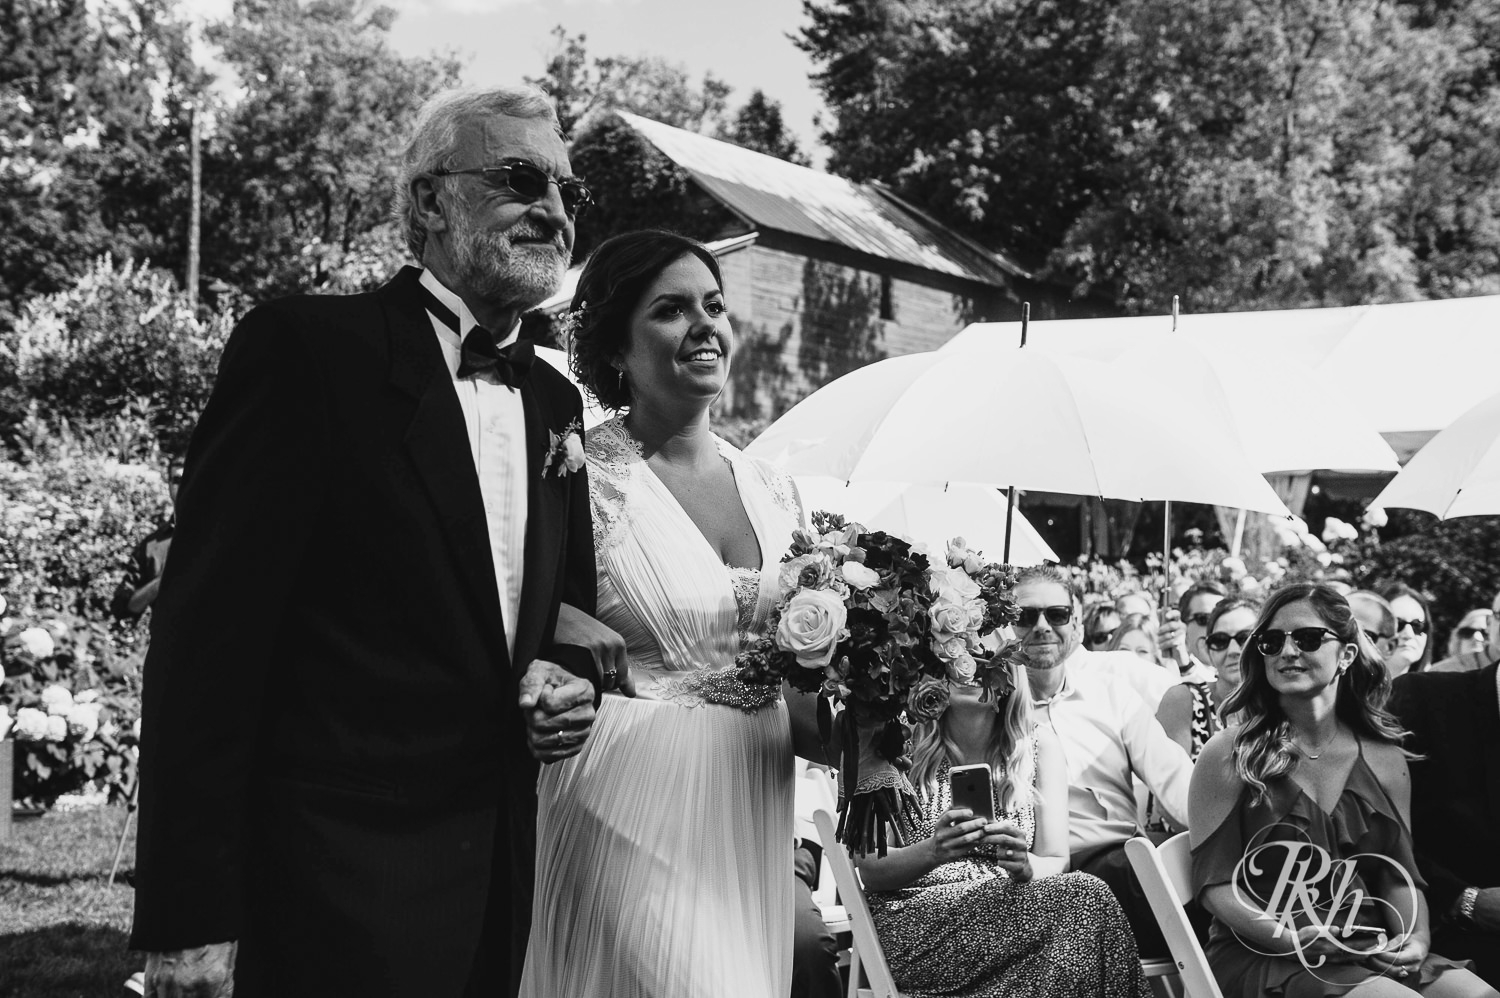 Bride and dad walk down the aisle during wedding ceremony at Camrose Hill Flower Farm in Stillwater, Minnesota.